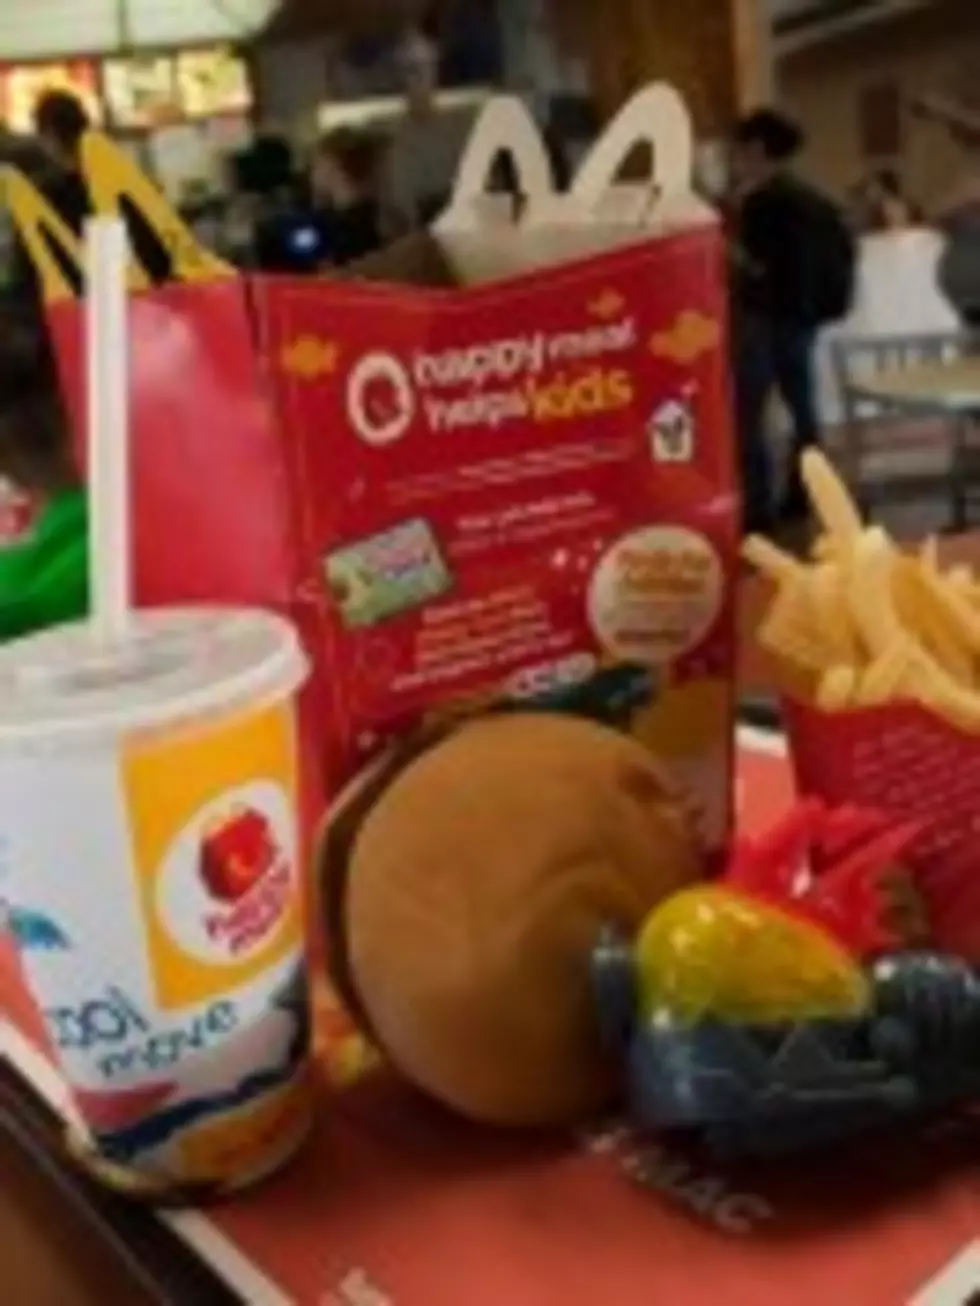 Can You Sue A Fast Food Restaurant For Making You Fat? Yes You Can!